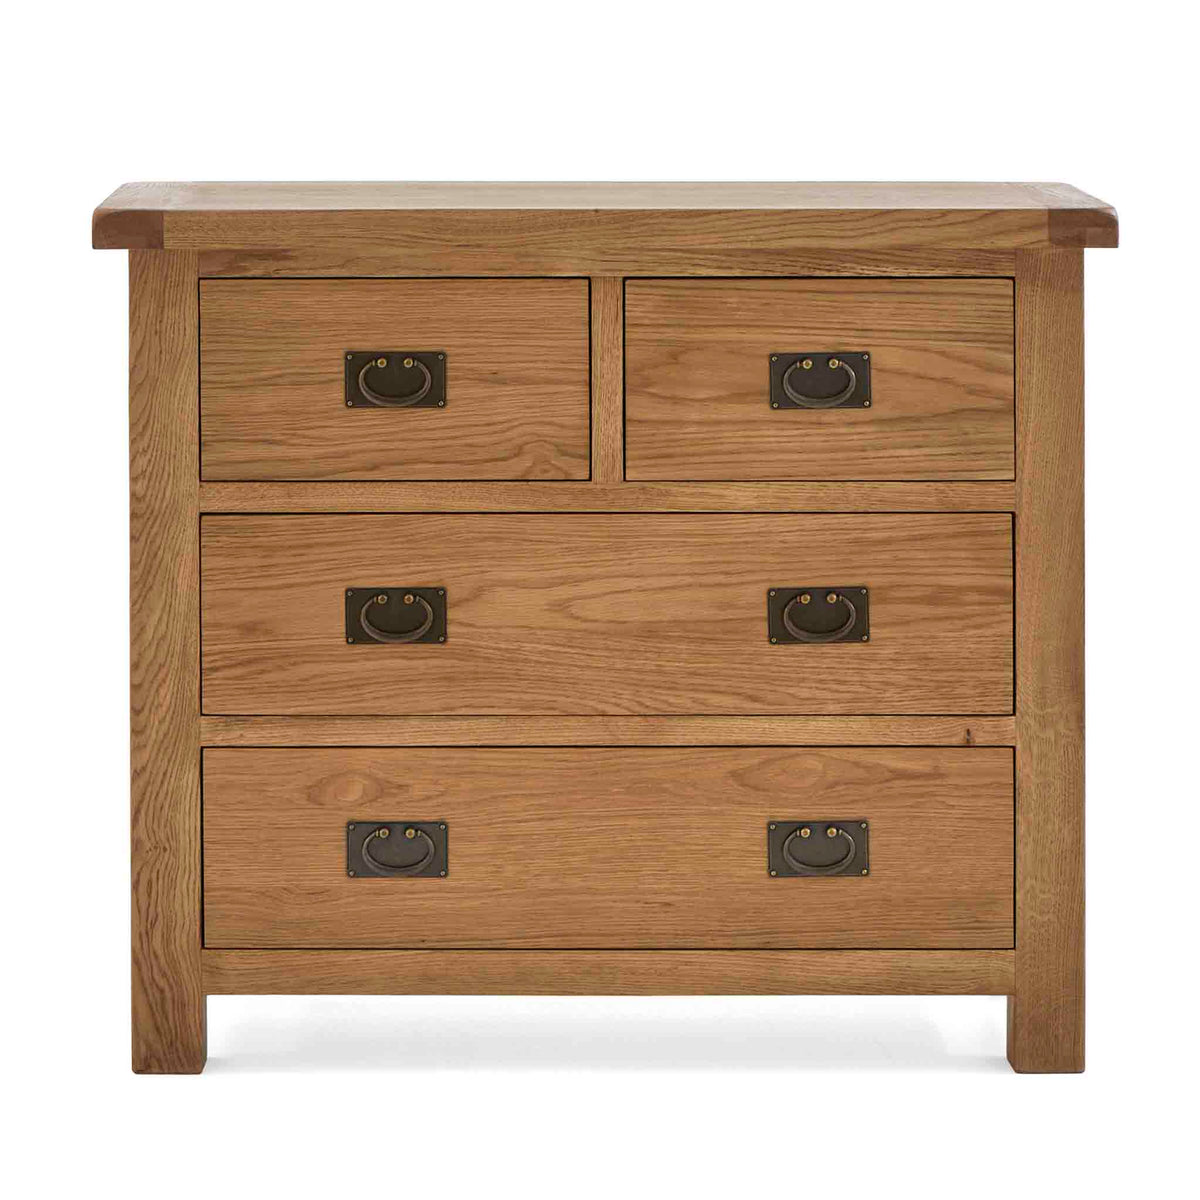 Zelah Oak 2 over 2 Drawer Chest of Drawers - Front view